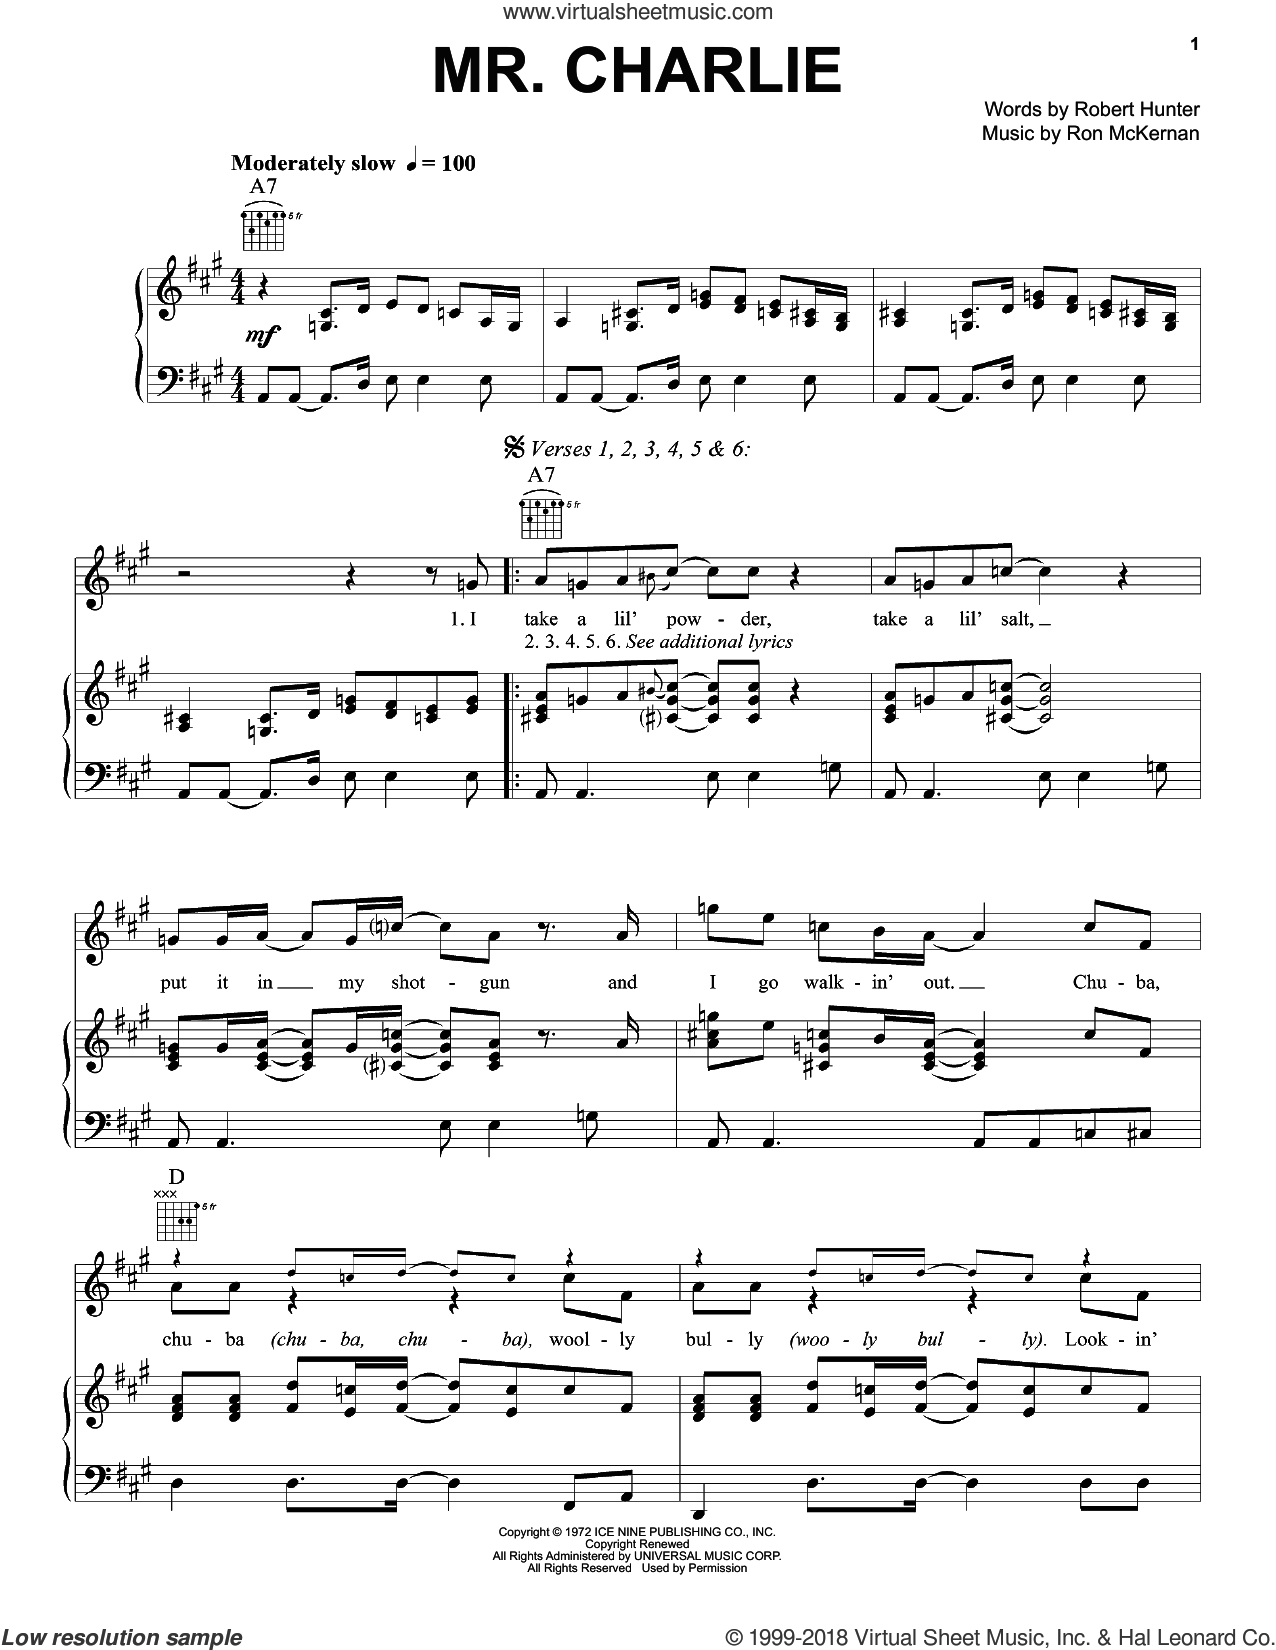 Mr. Charlie sheet music for voice, piano or guitar (PDF)